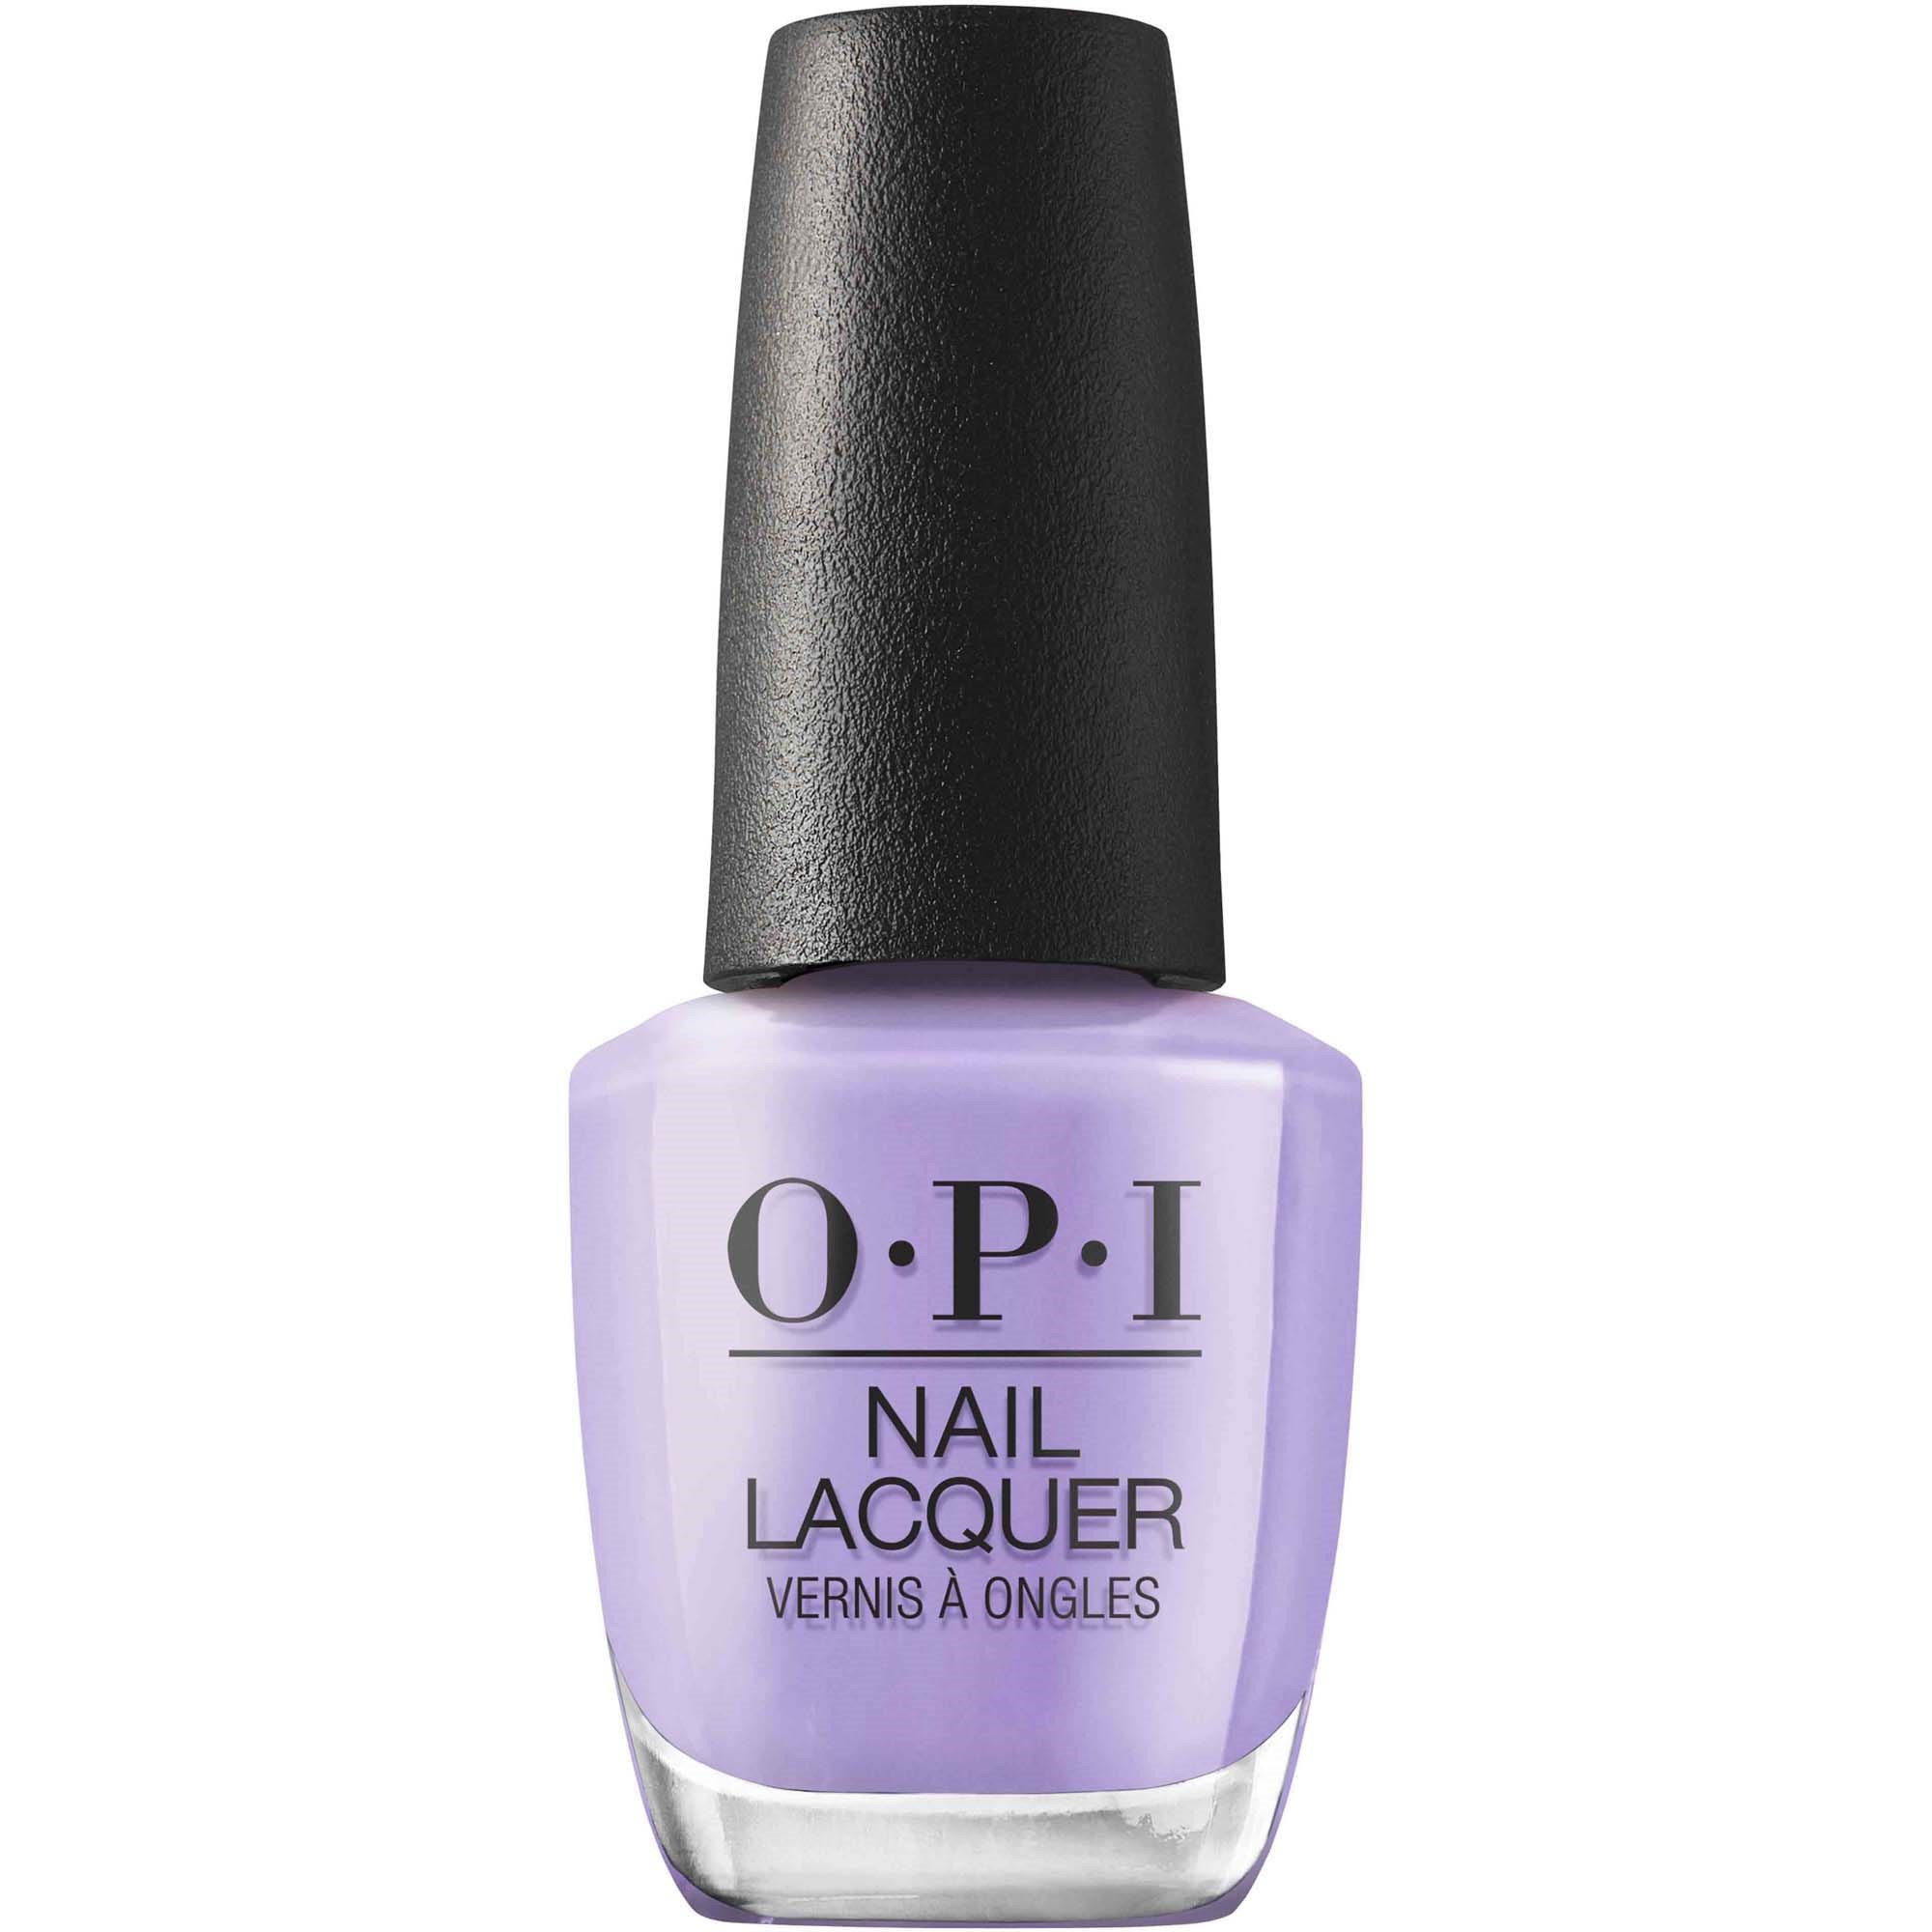 OPI Nail Lacquer Naughty & Nice Sickeningly Sweet